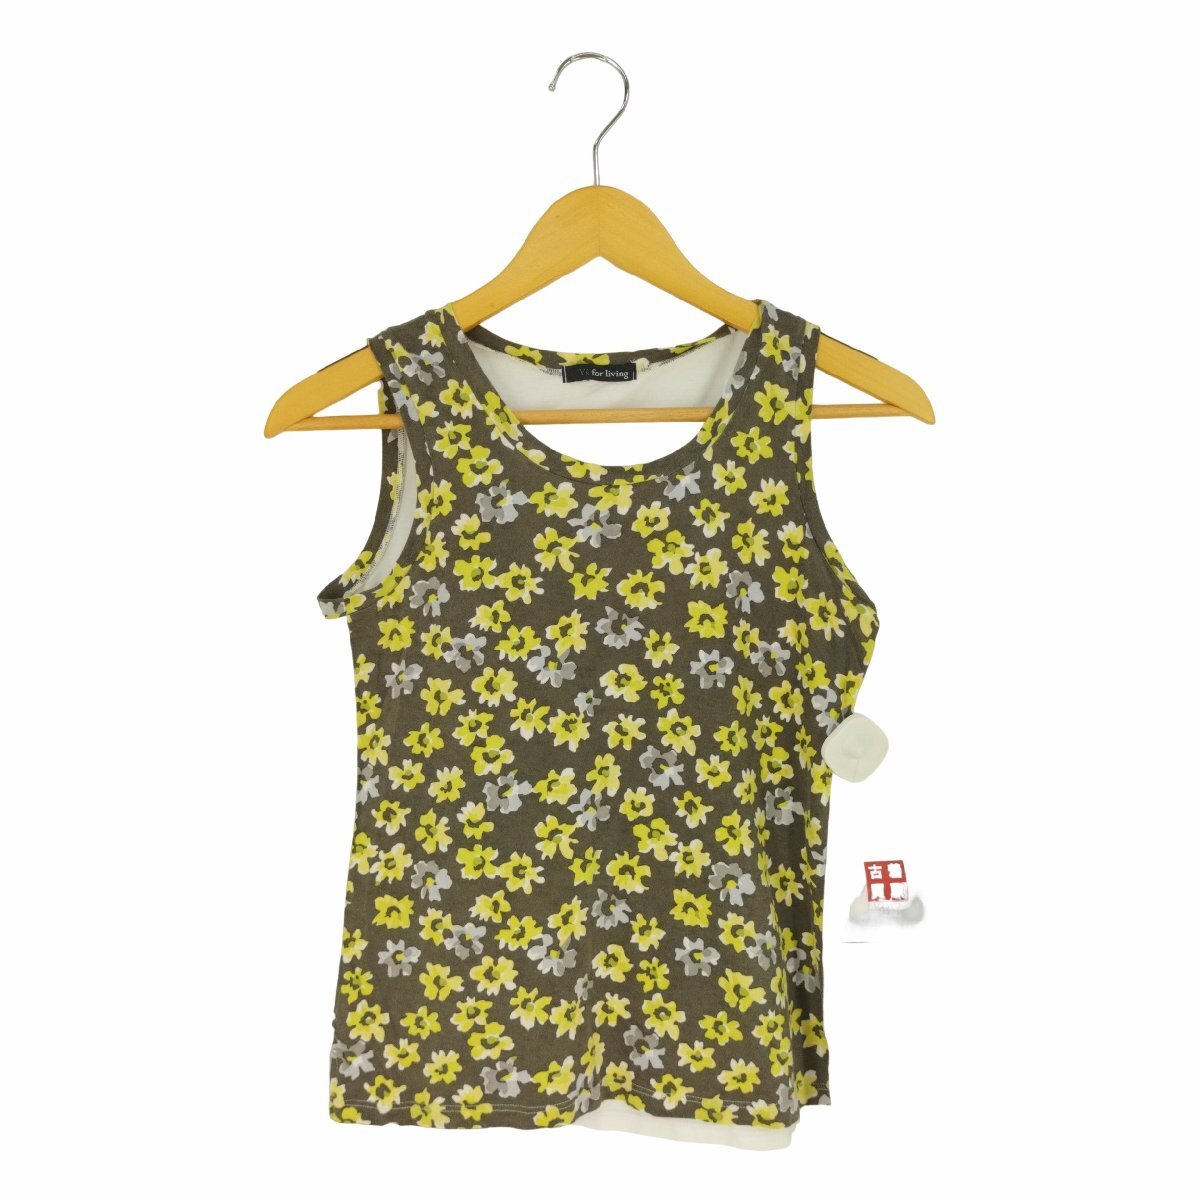 Y s FOR LIVING( wise four living ) flower pattern switch tank top lady's inscription used old clothes 0723